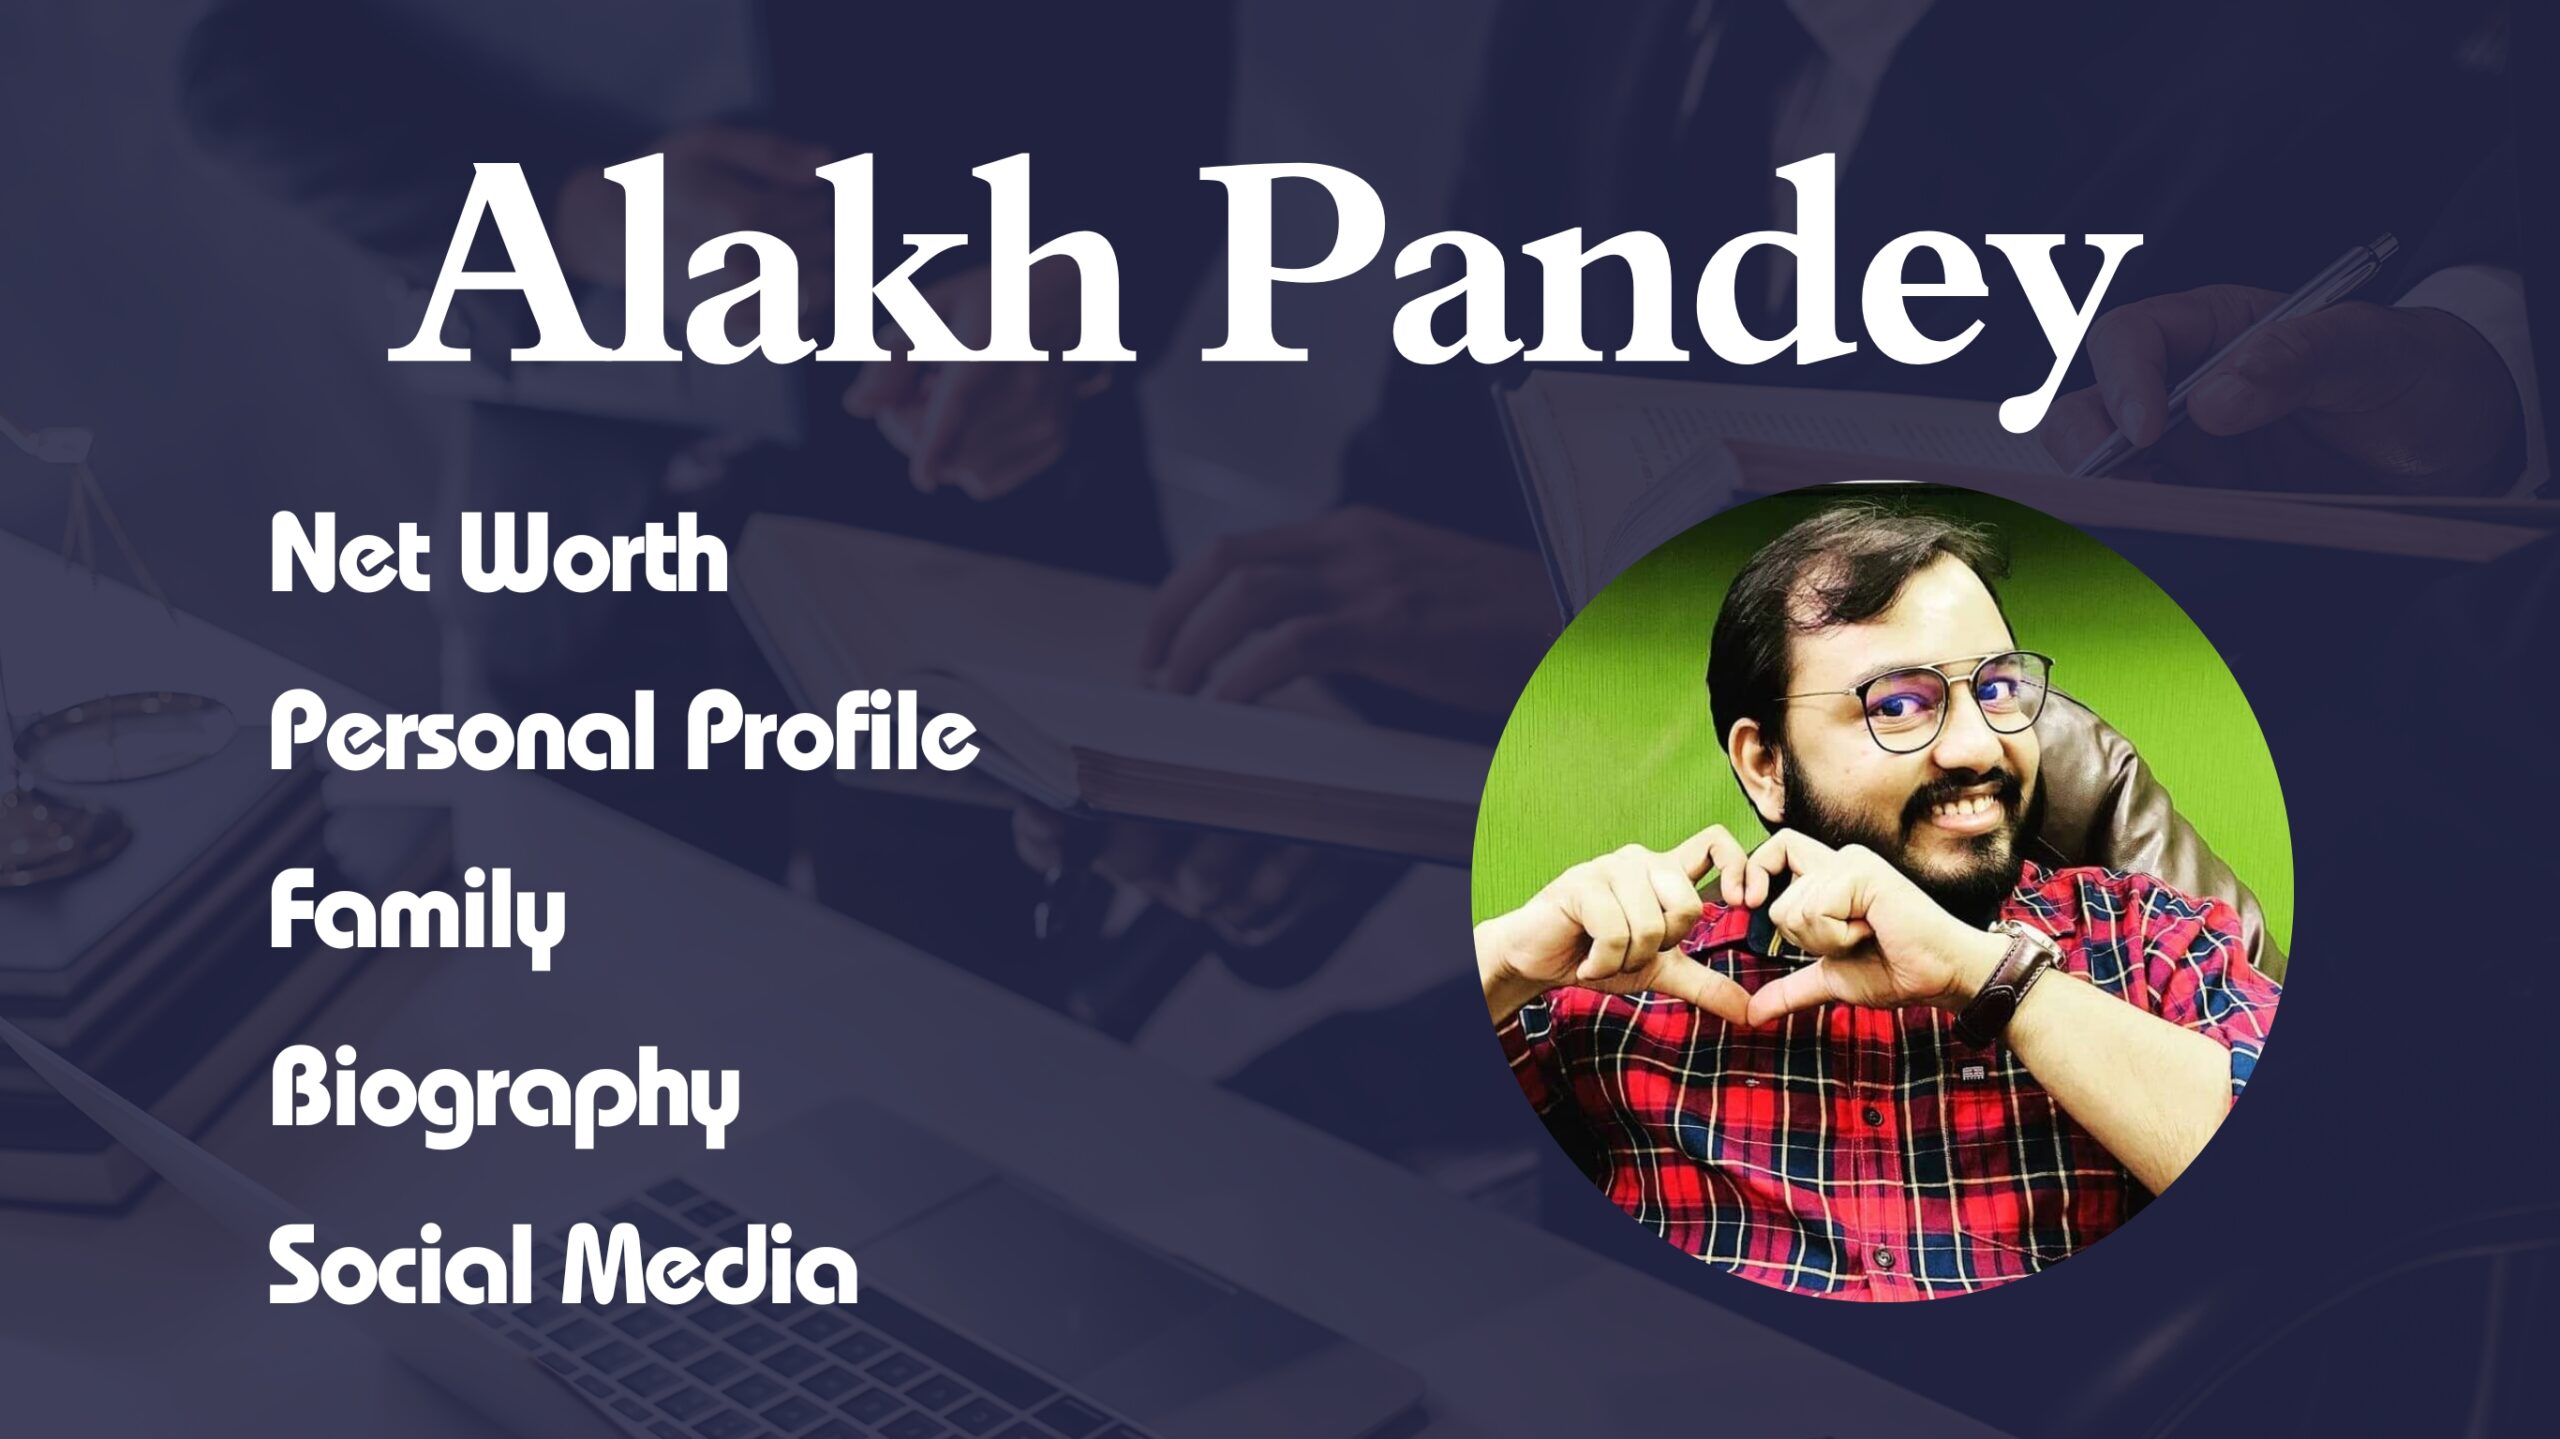 Alakh Pandey net worth, biography and family